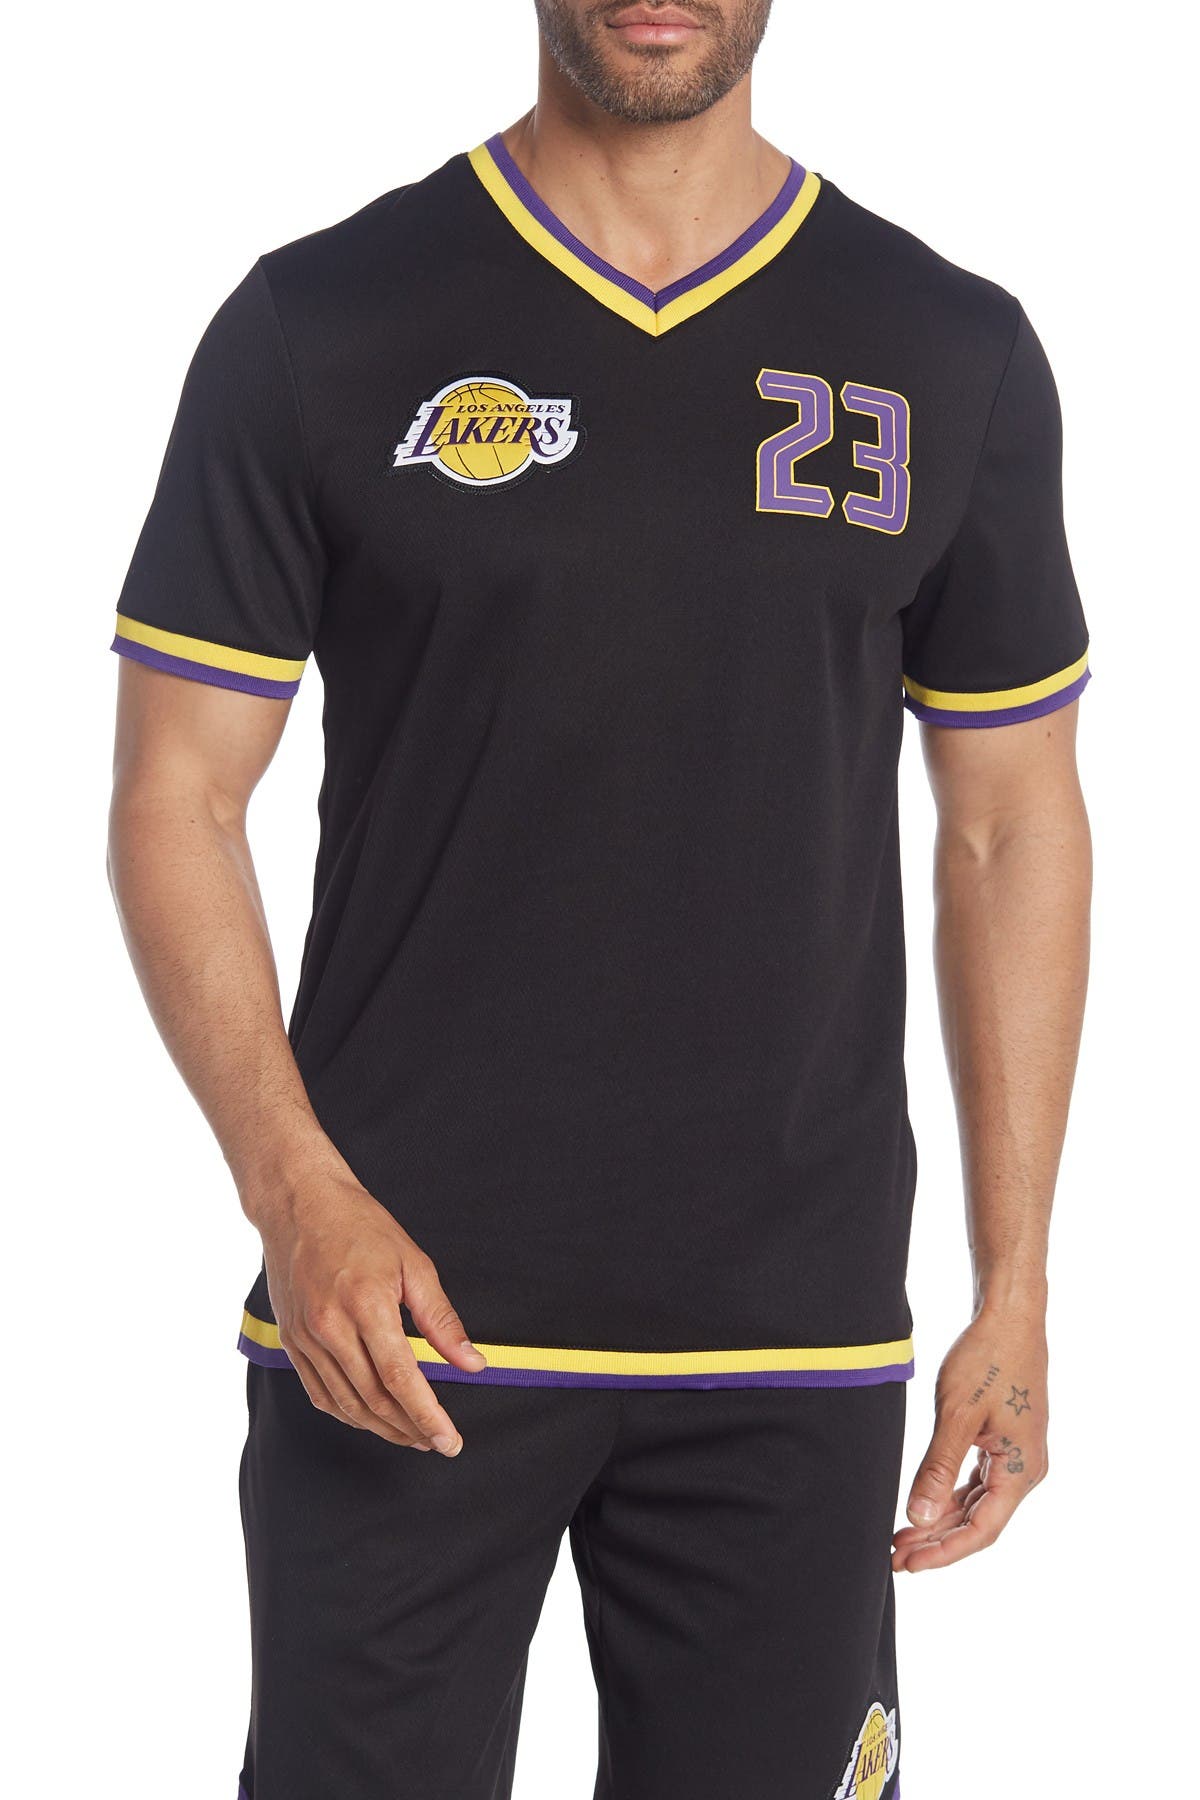 lakers full jersey